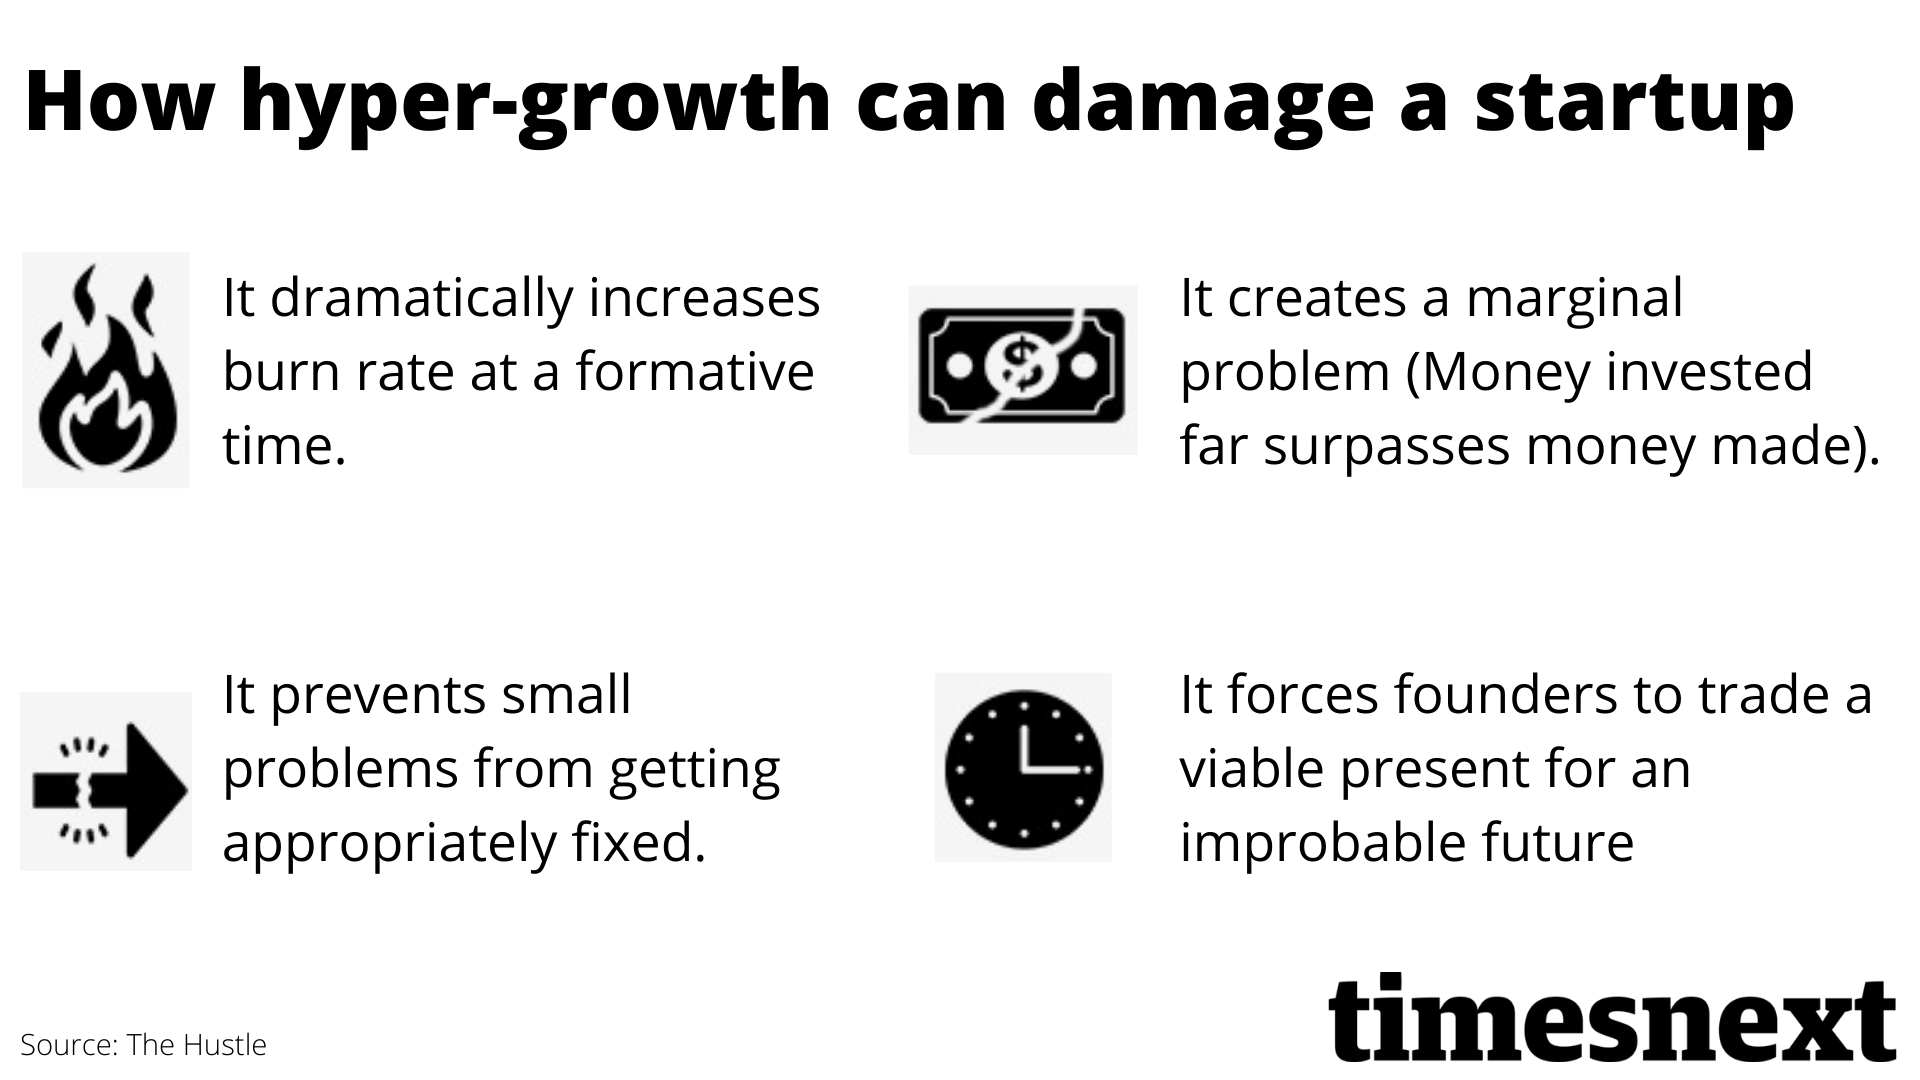 "Hyper-growth" mantra can do more harm than good